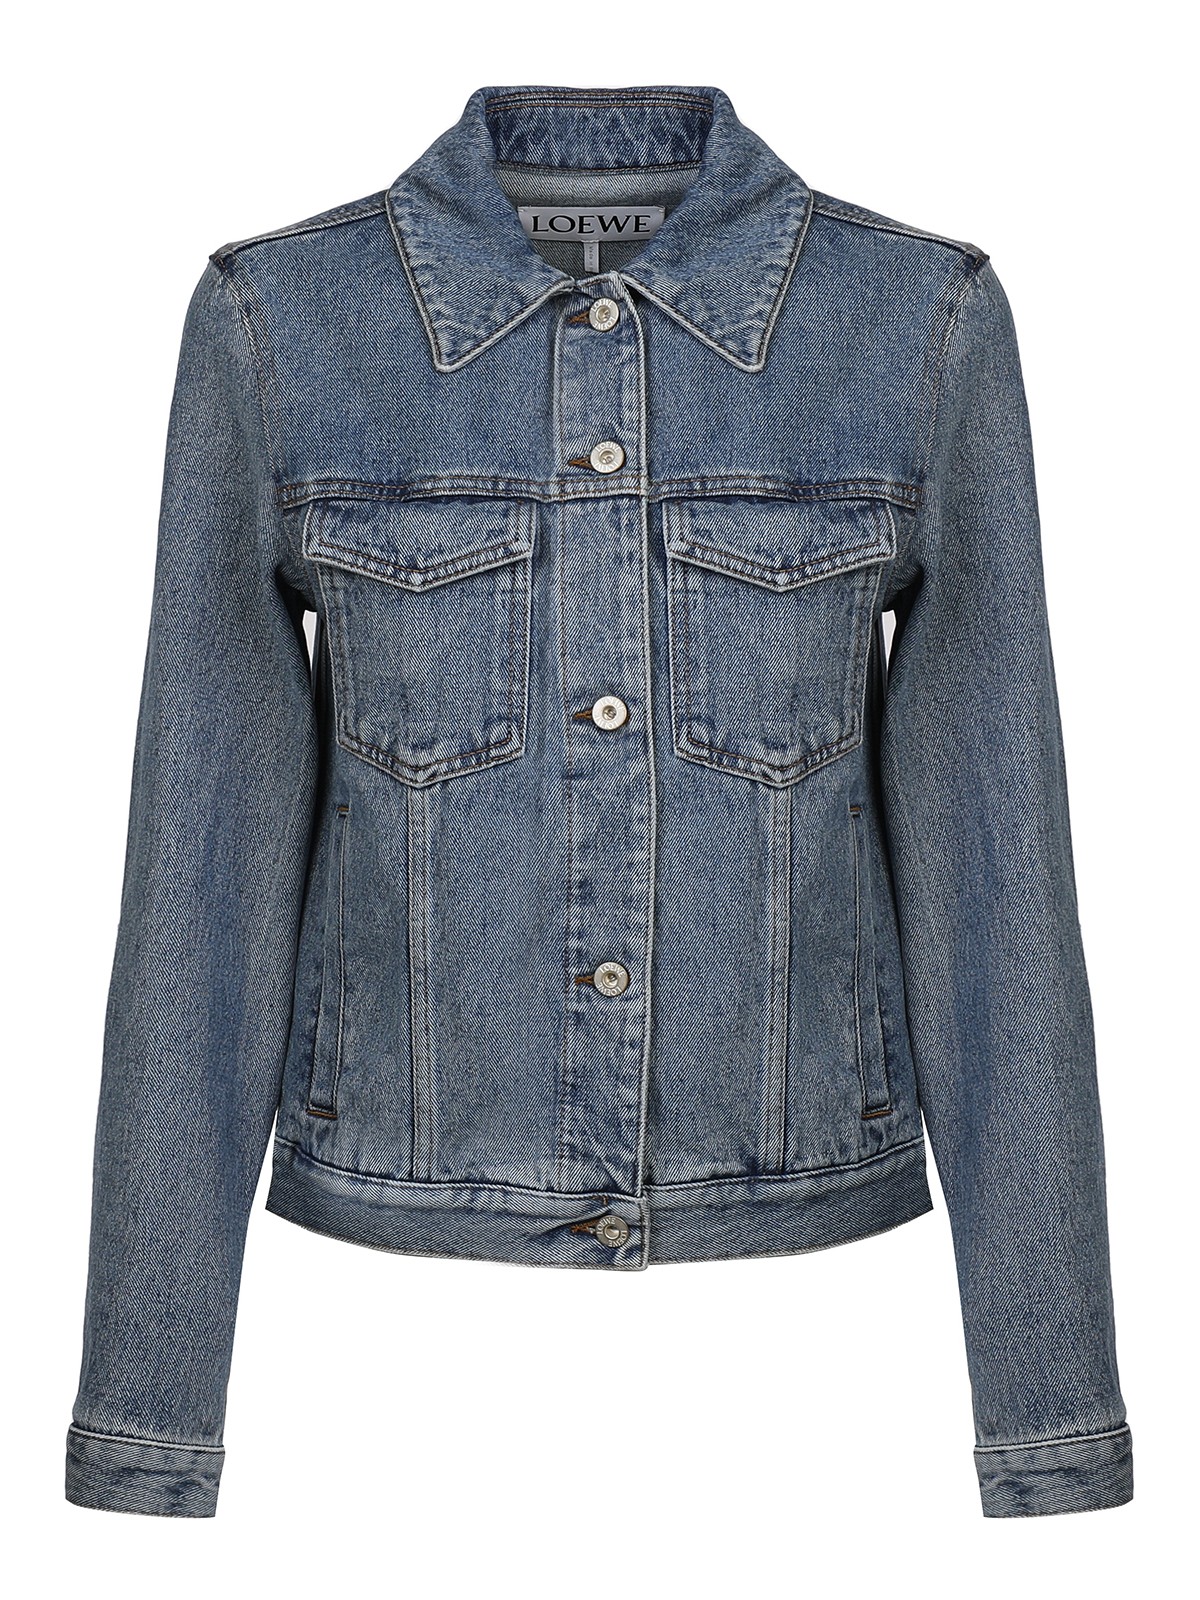 Loewe Denim Jacket With Logo Embroidery On Elbows In Light Wash